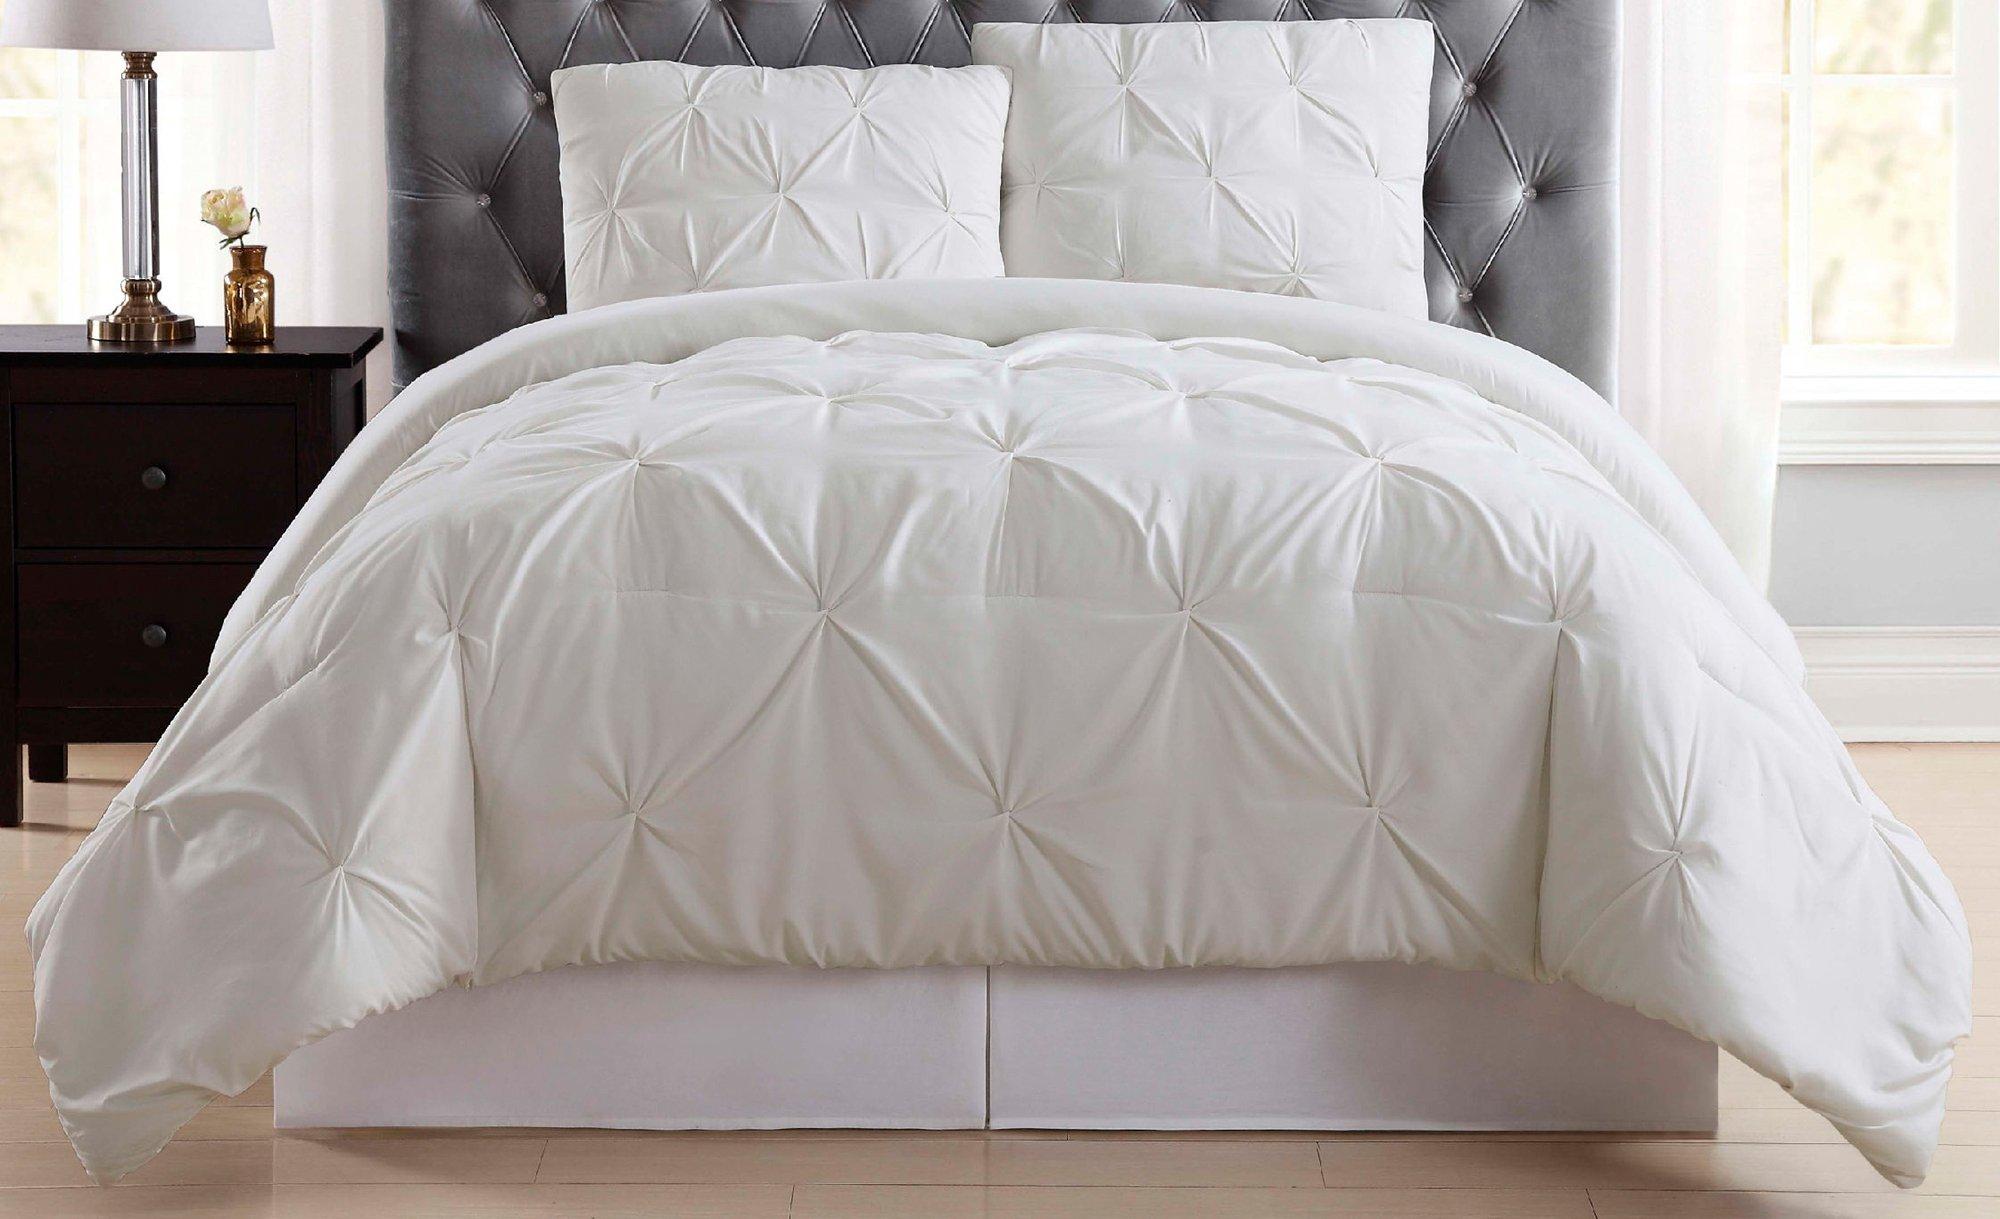 Photos - Bed Linen Truly Soft Pleated Duvet Set